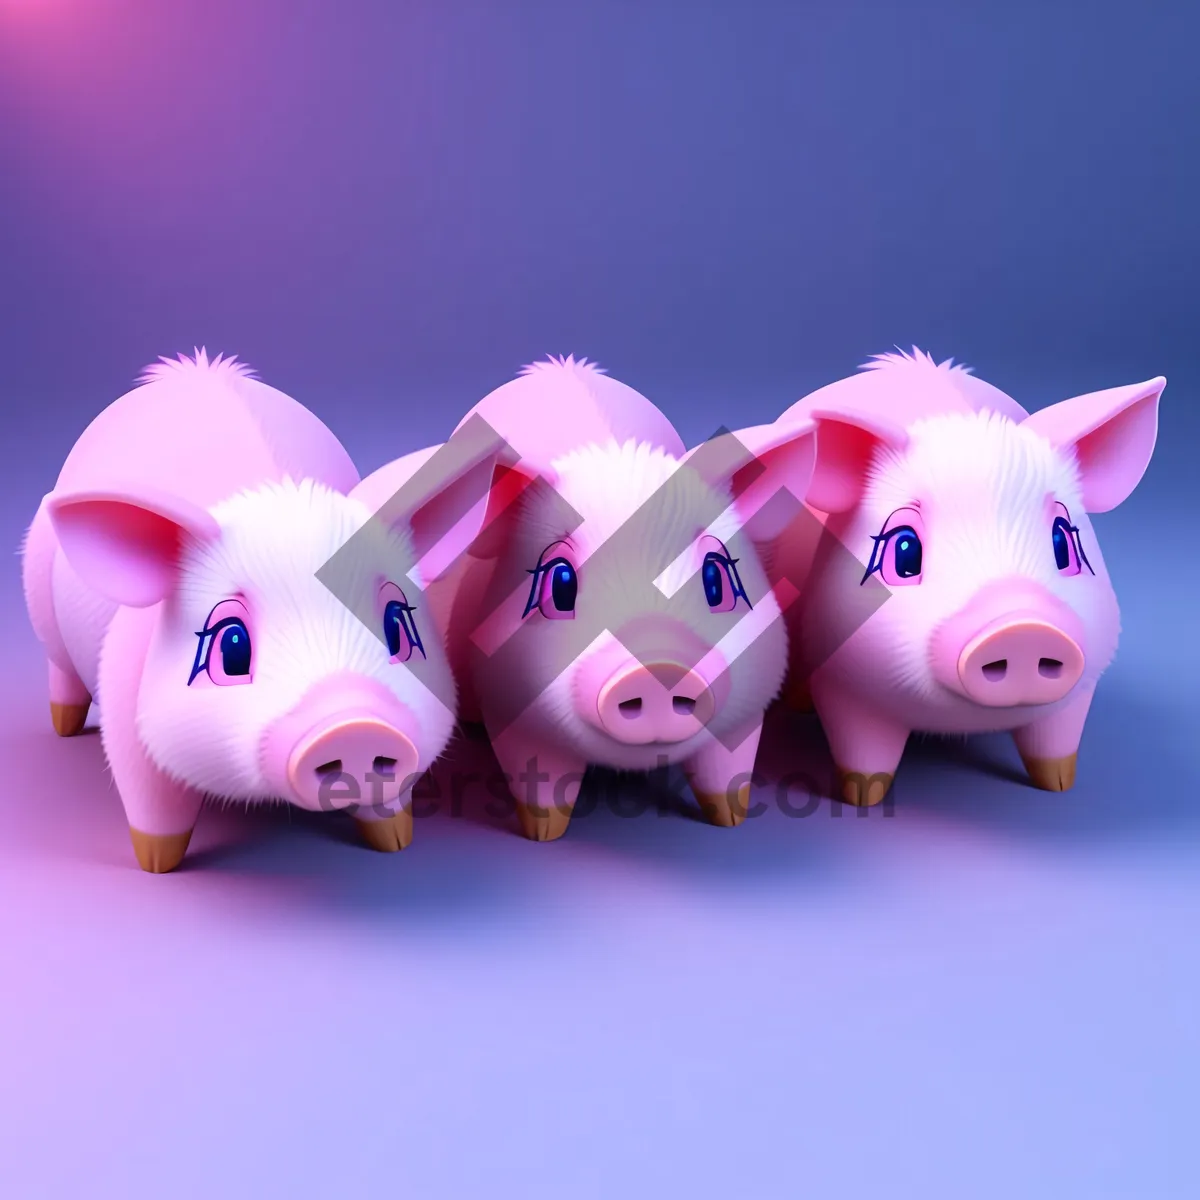 Picture of Pink Ceramic Piggy Bank - Saving Money and Growing Wealth